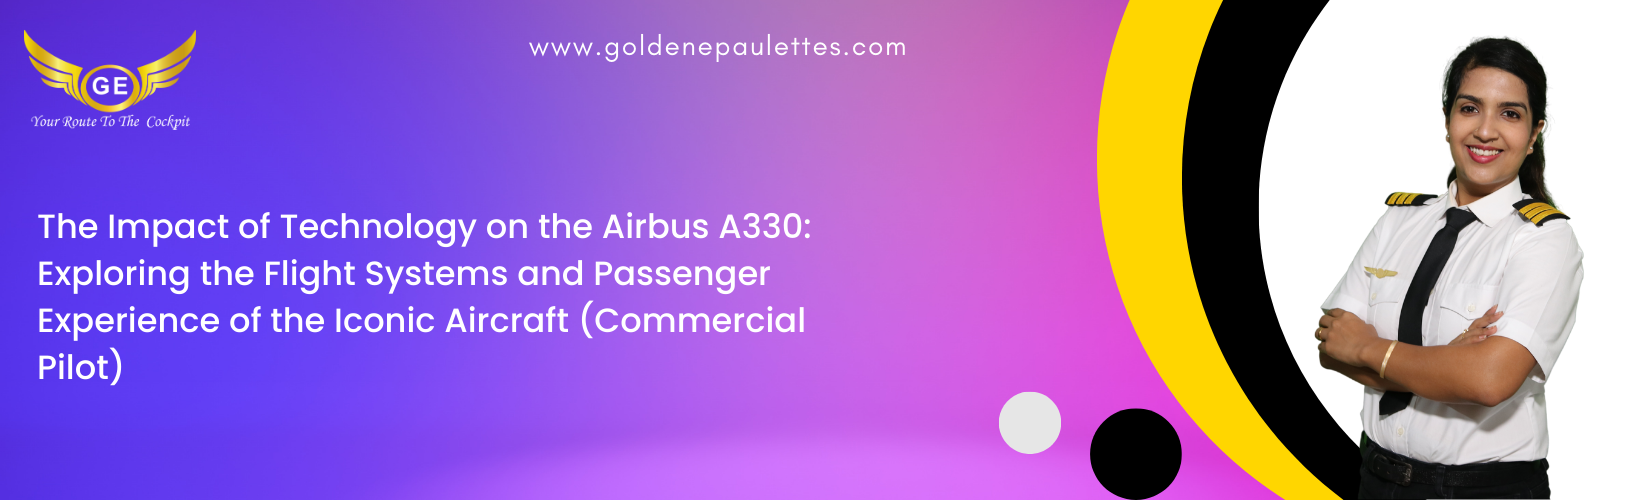 The Use of Technology in the Airbus A330